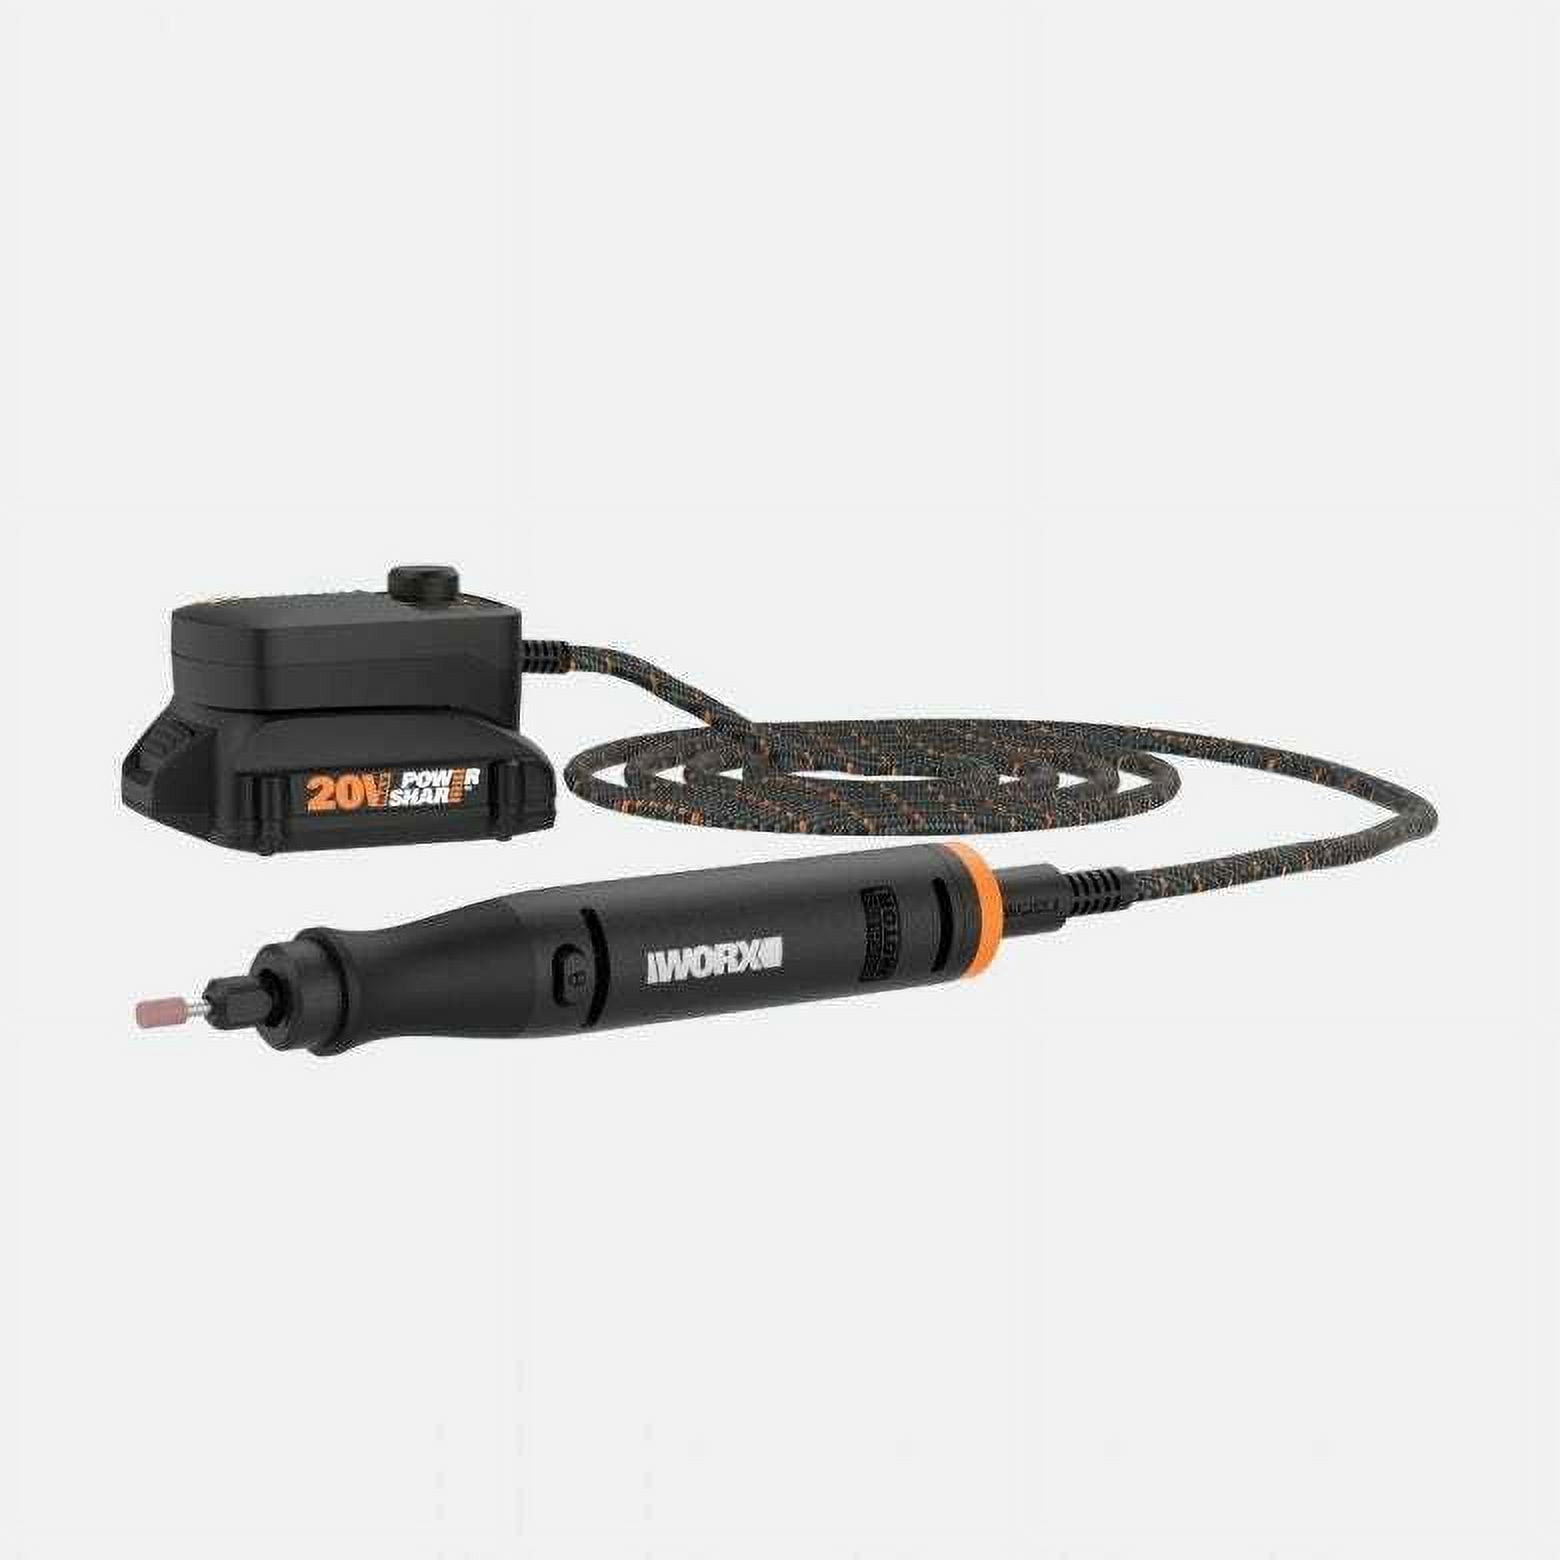 WX745L.9 WORX 20V MAKERX ZipSnip Mini Rotary Cutter - Tool Only - CR -  Helia Beer Co